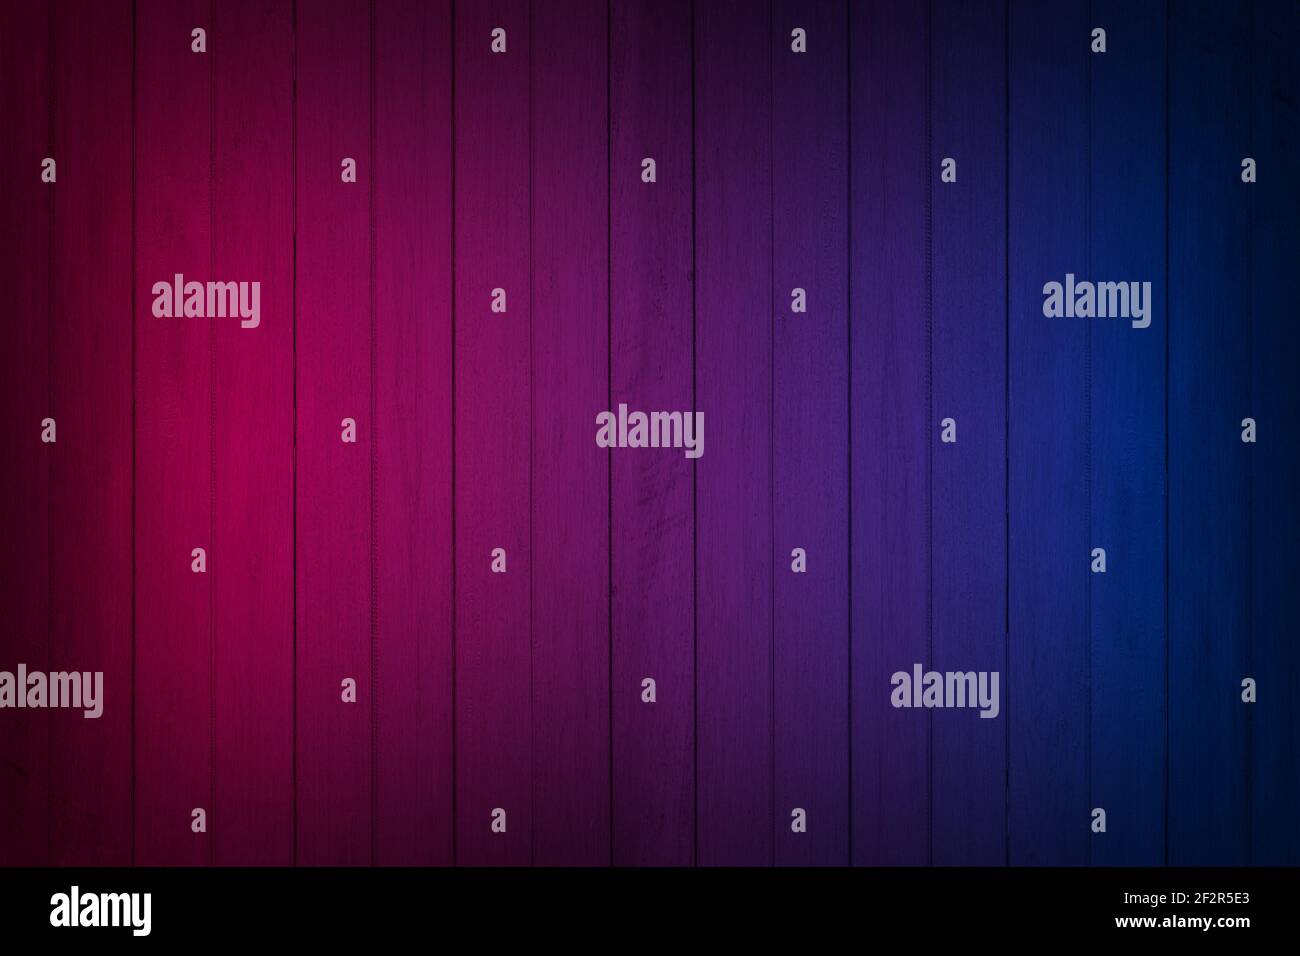 Neon light on wood wall texture background. Lighting effect red and blue neon backgrounds. Stock Photo